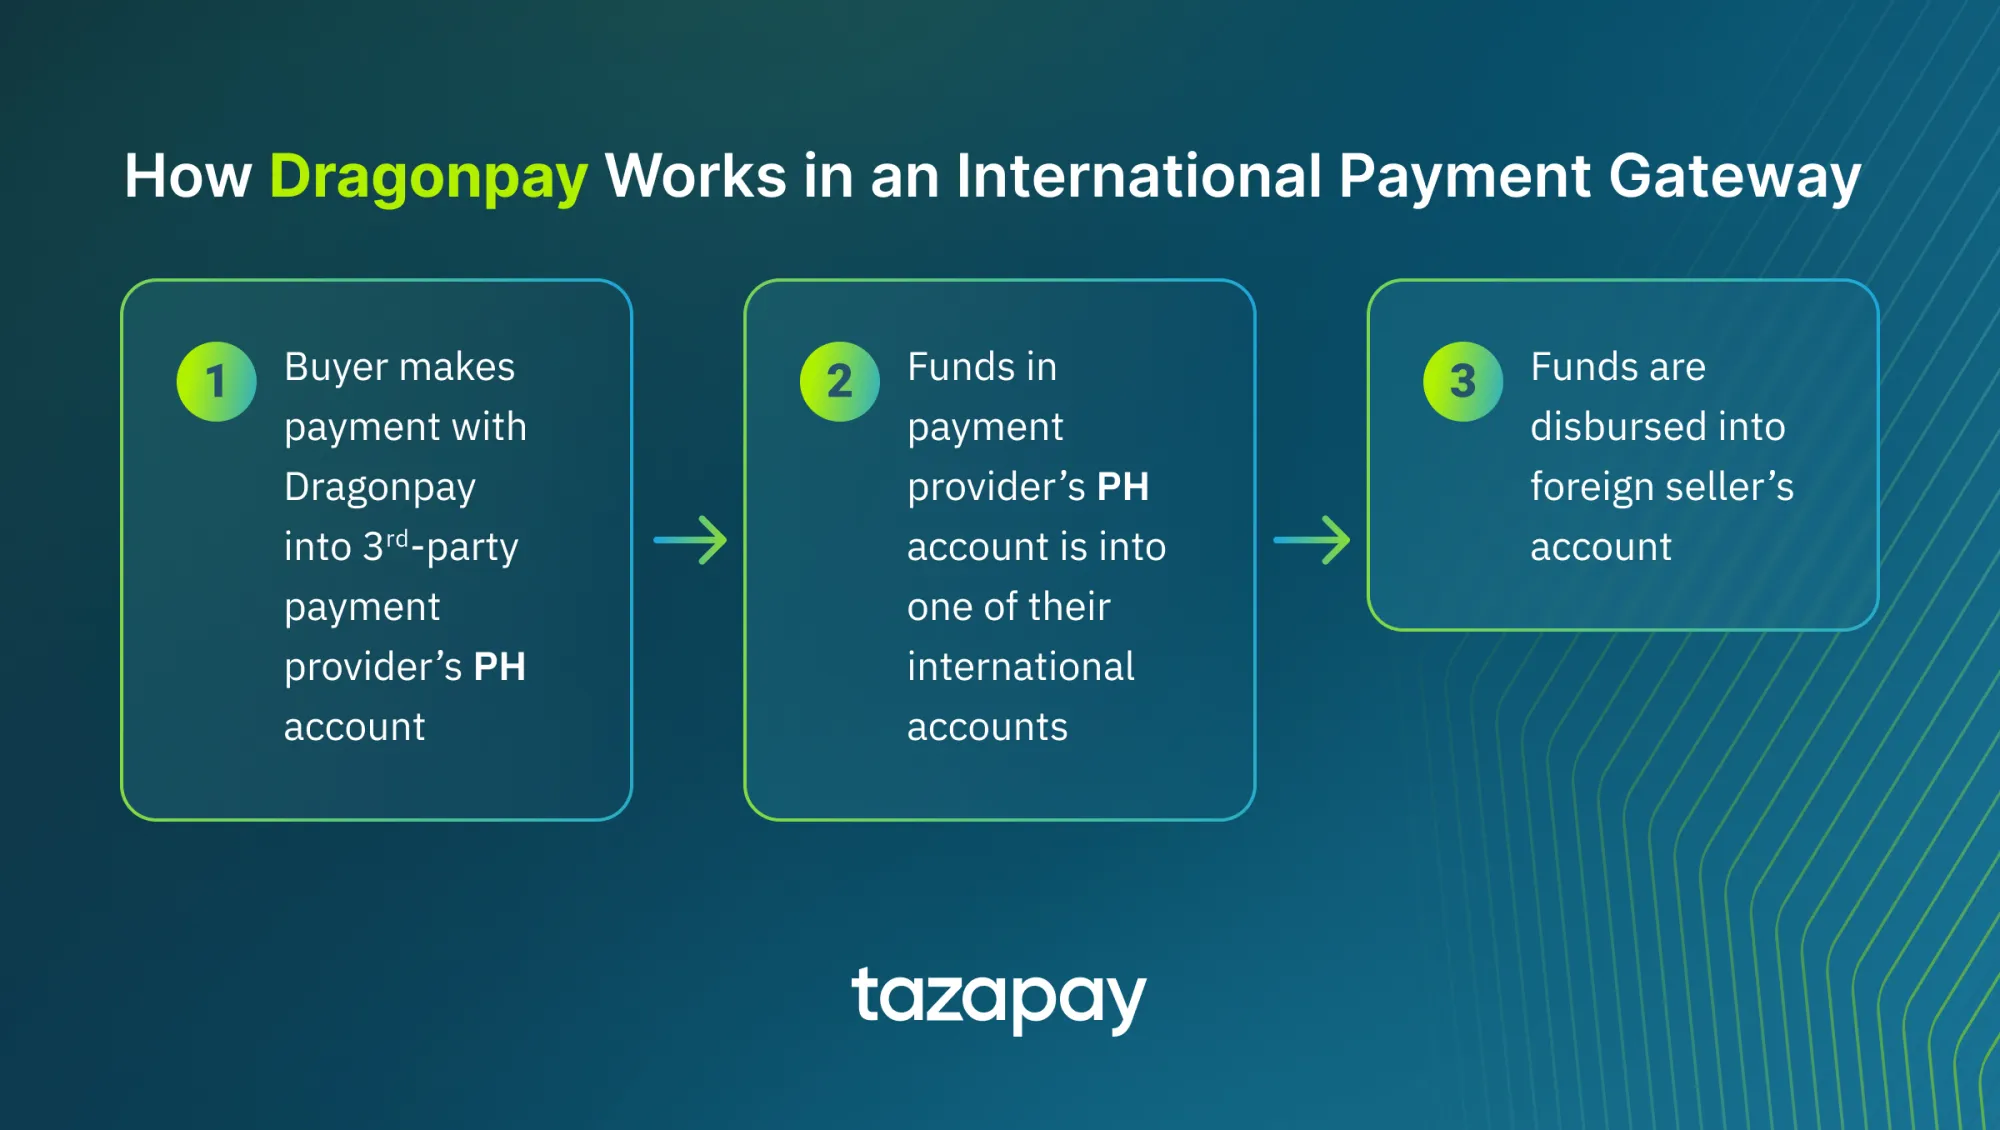 how dragonpay works in an international payment gateway